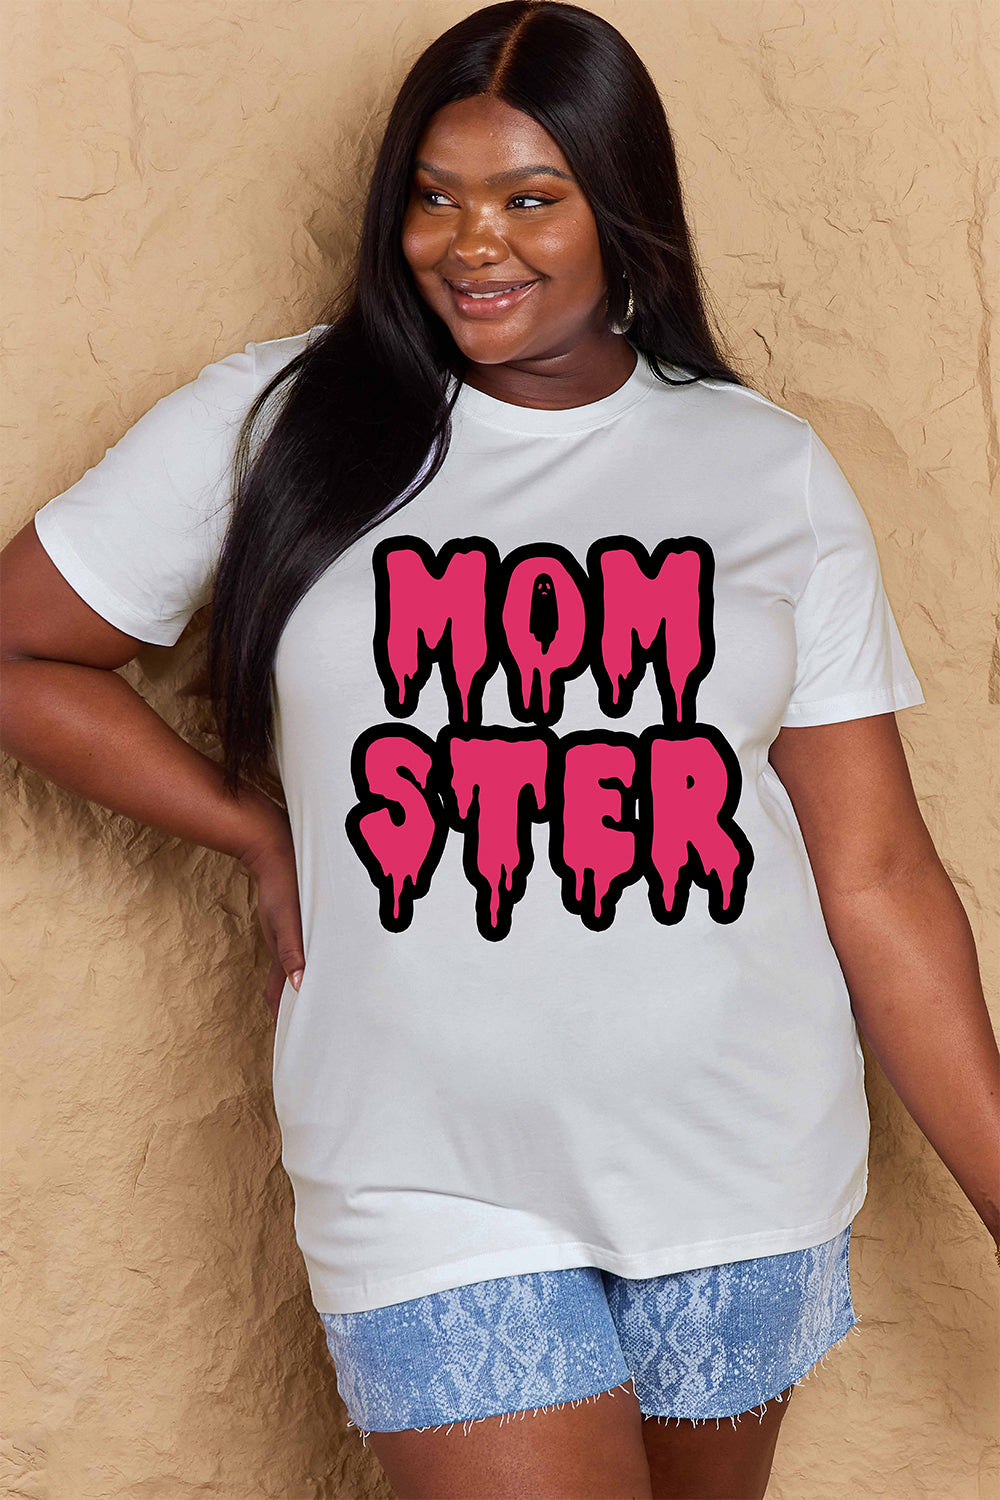 Mom-Ster Graphic Tee